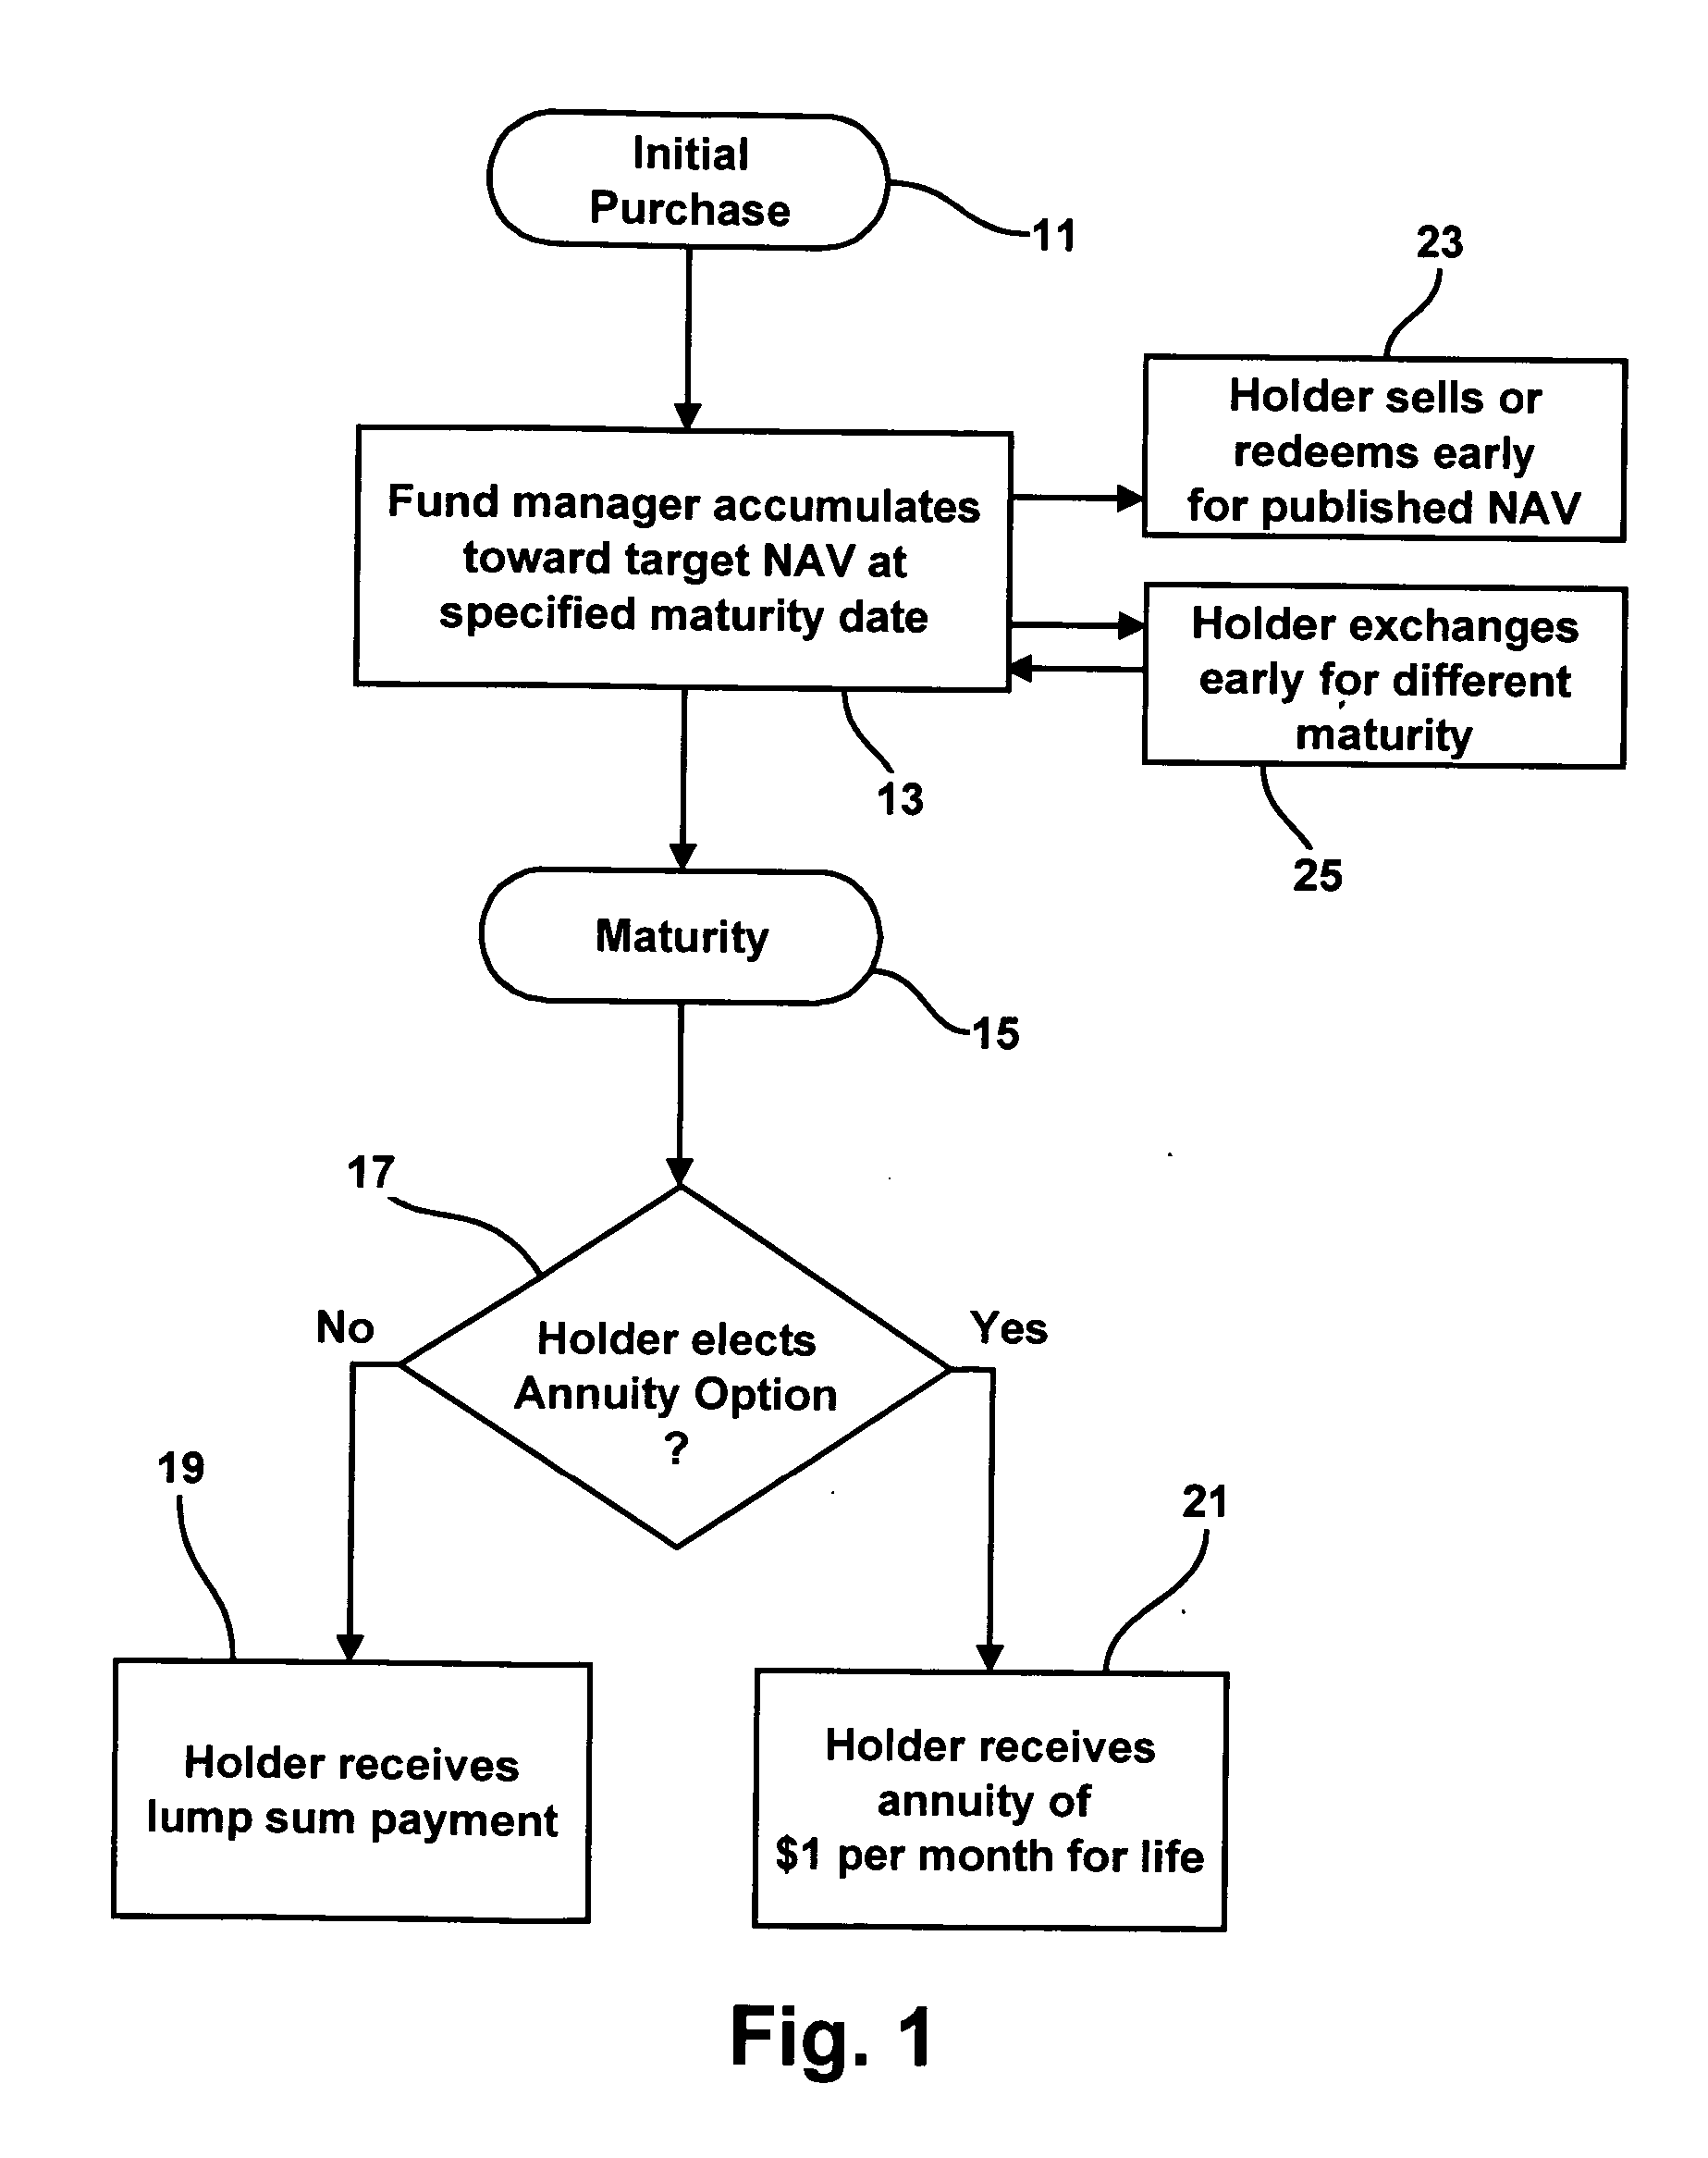 Methods for issuing, distributing, managing and redeeming investment instruments providing normalized annuity options